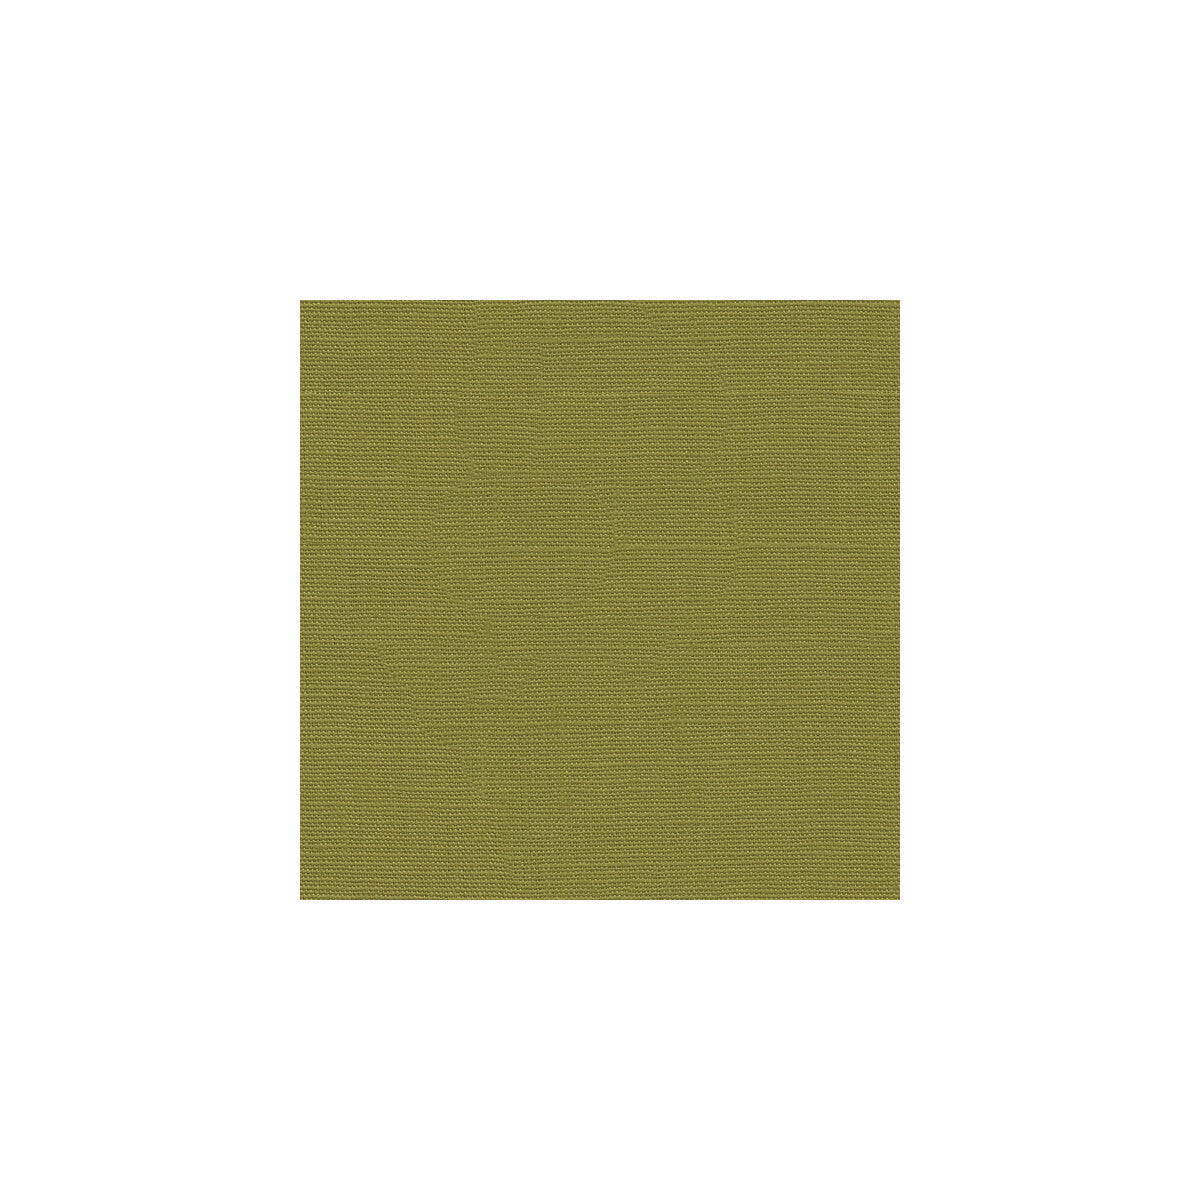 Kravet Basics fabric in 32324-303 color - pattern 32324.303.0 - by Kravet Basics in the Perfect Plains collection